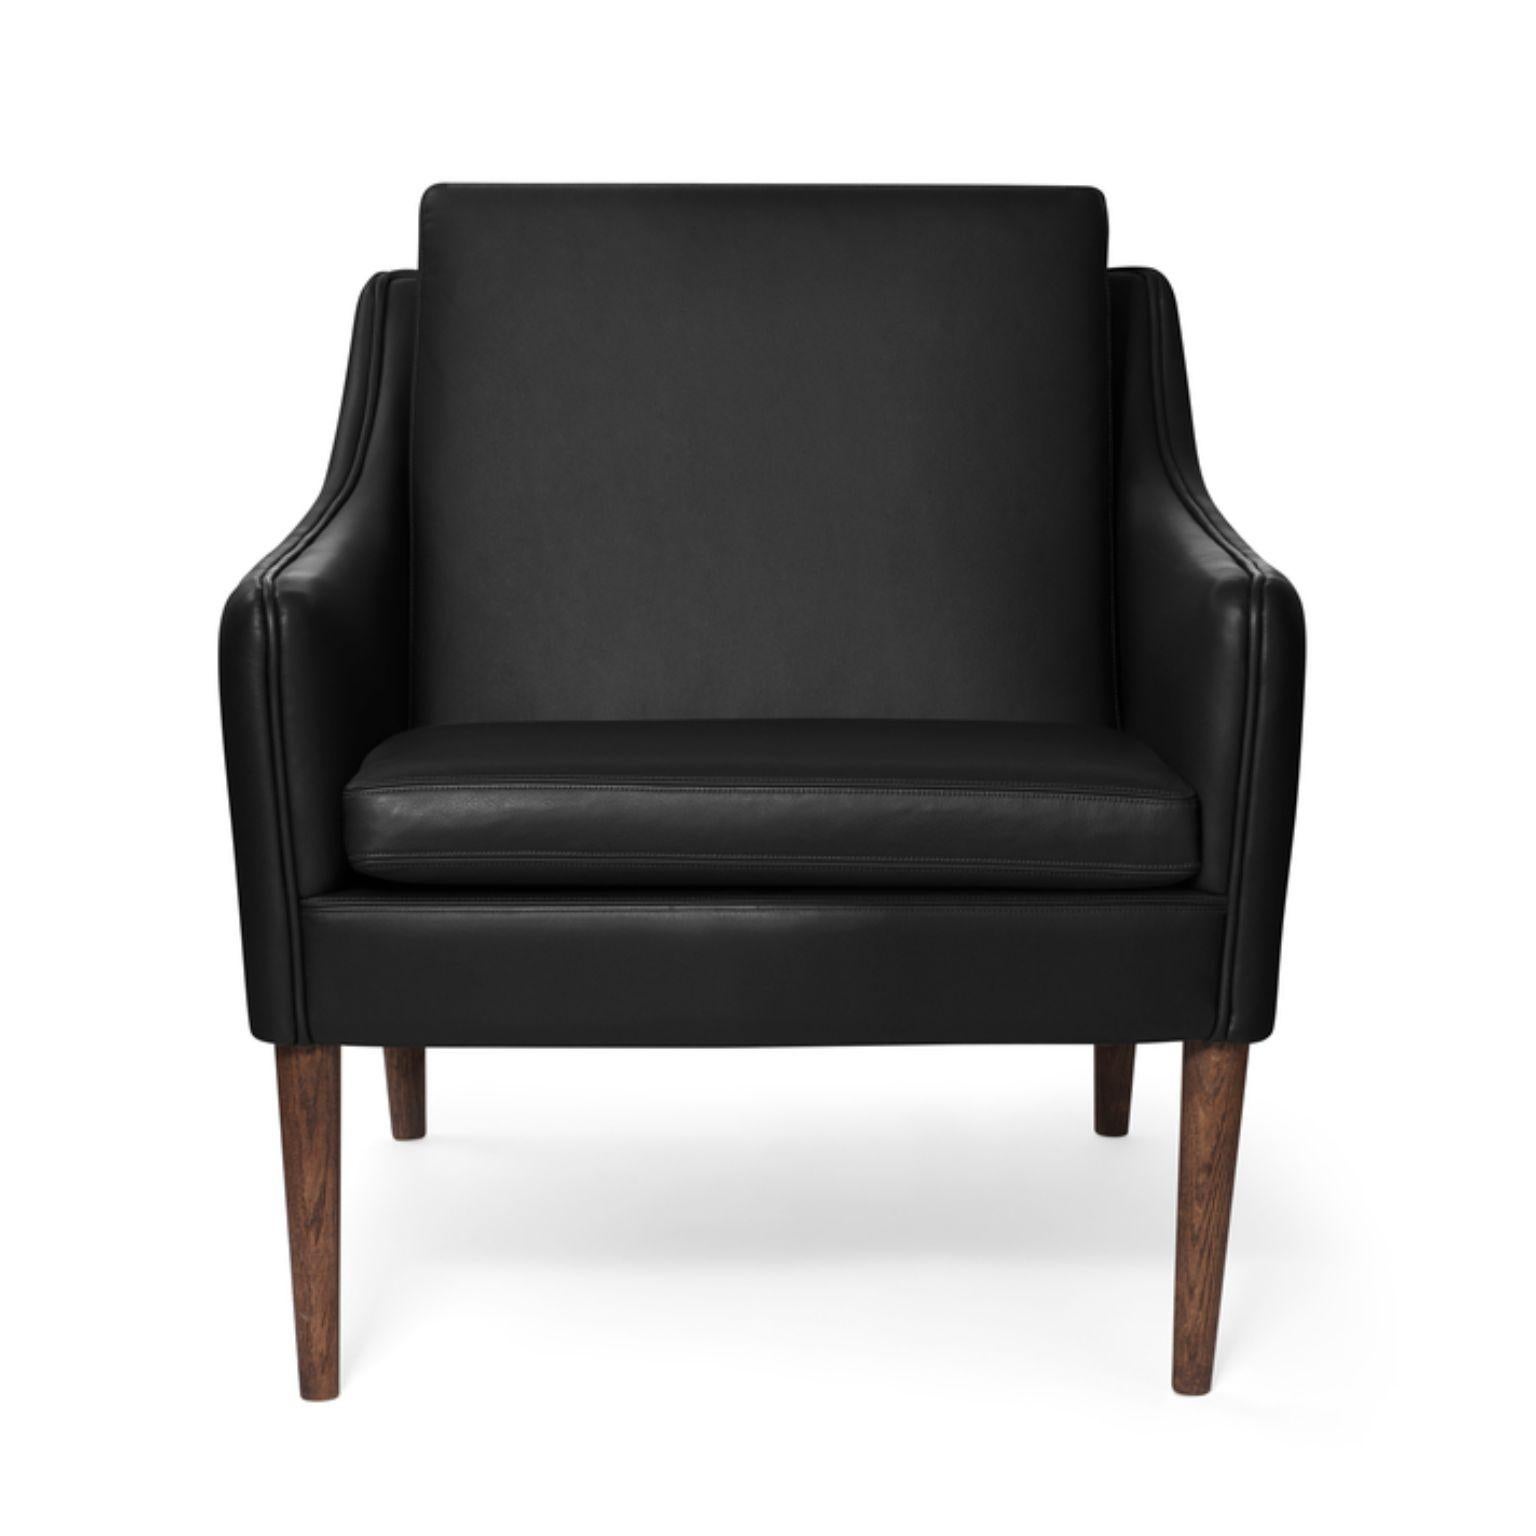 Mr. Olsen lounge chair solid solid walnut black leather by Warm Nordic
Dimensions: D 81 x W 79 x H 78 cm
Material: Textile upholstery, foam, spring system, oak, leather, walnut
Weight: 27 kg
Also available in different colours, materials and